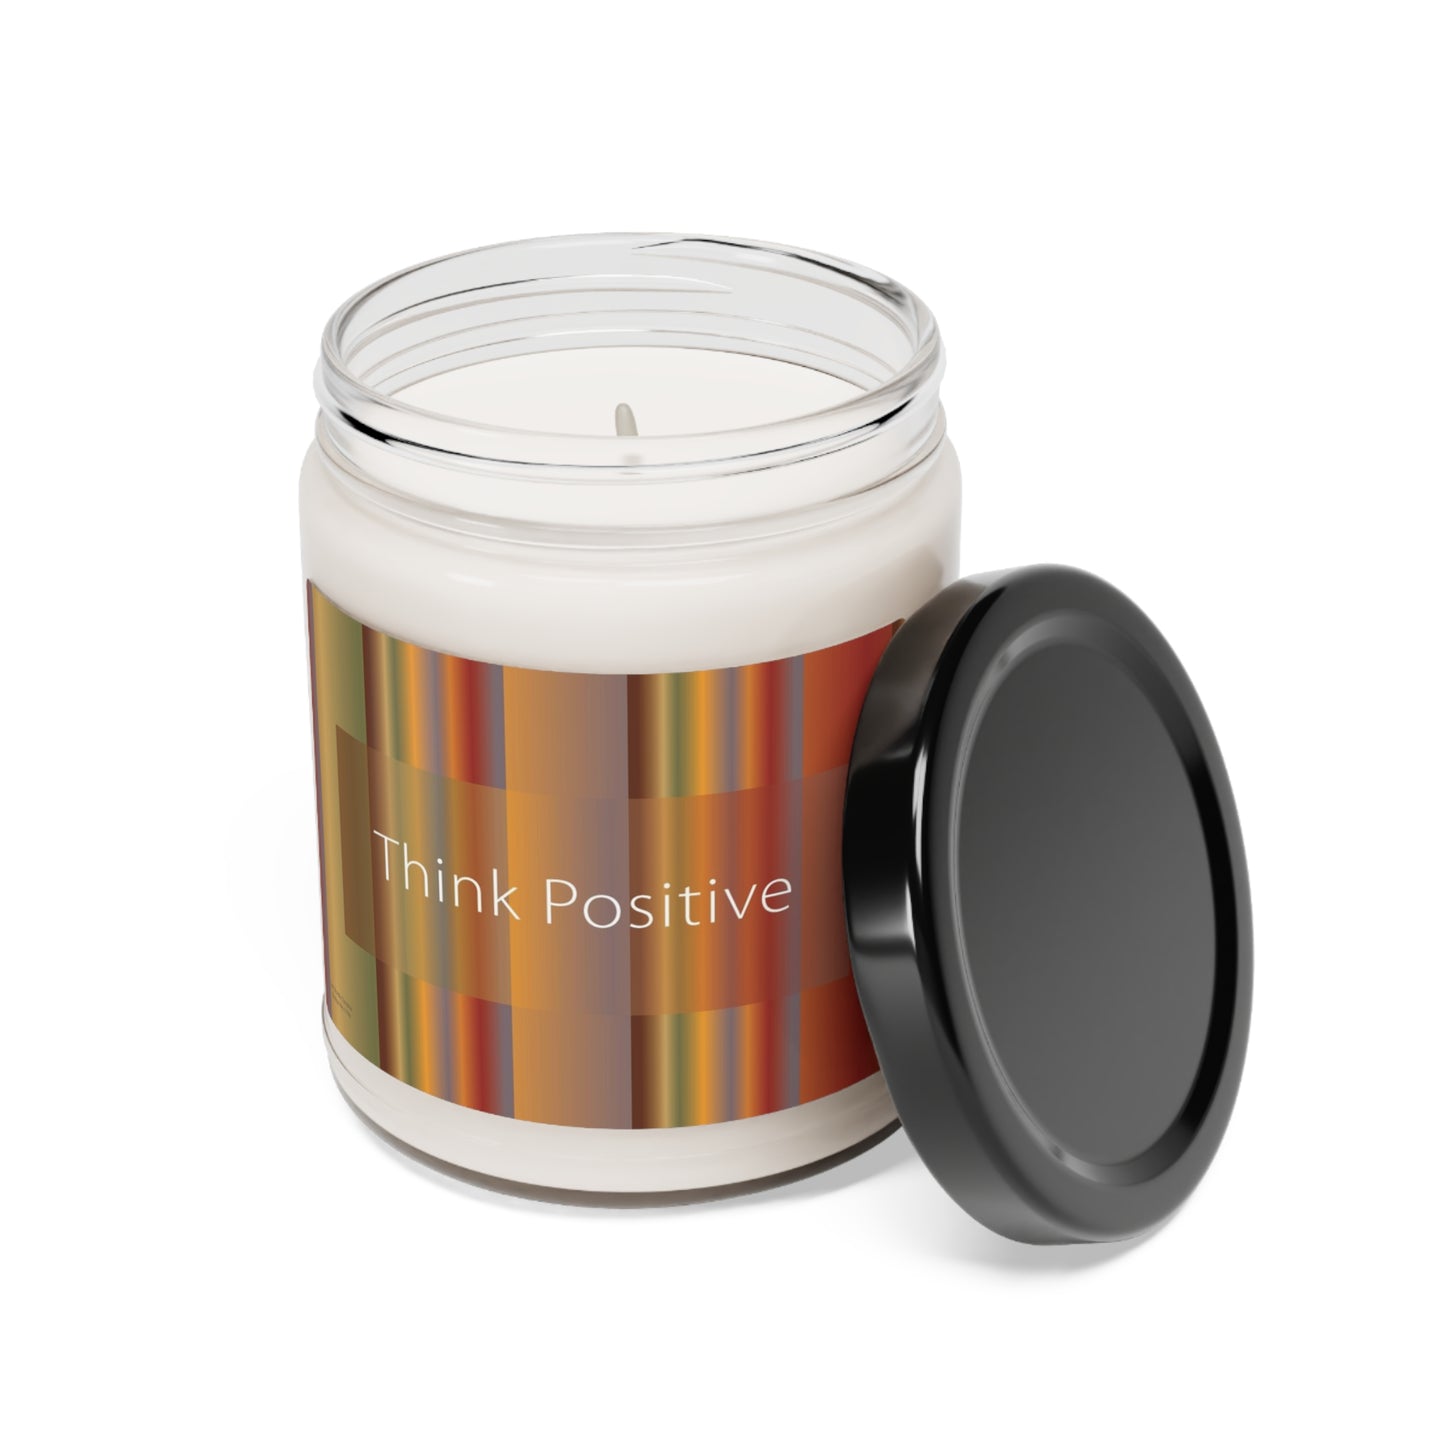 Scented Soy Candle, 9oz Think Positive - Design No.1700